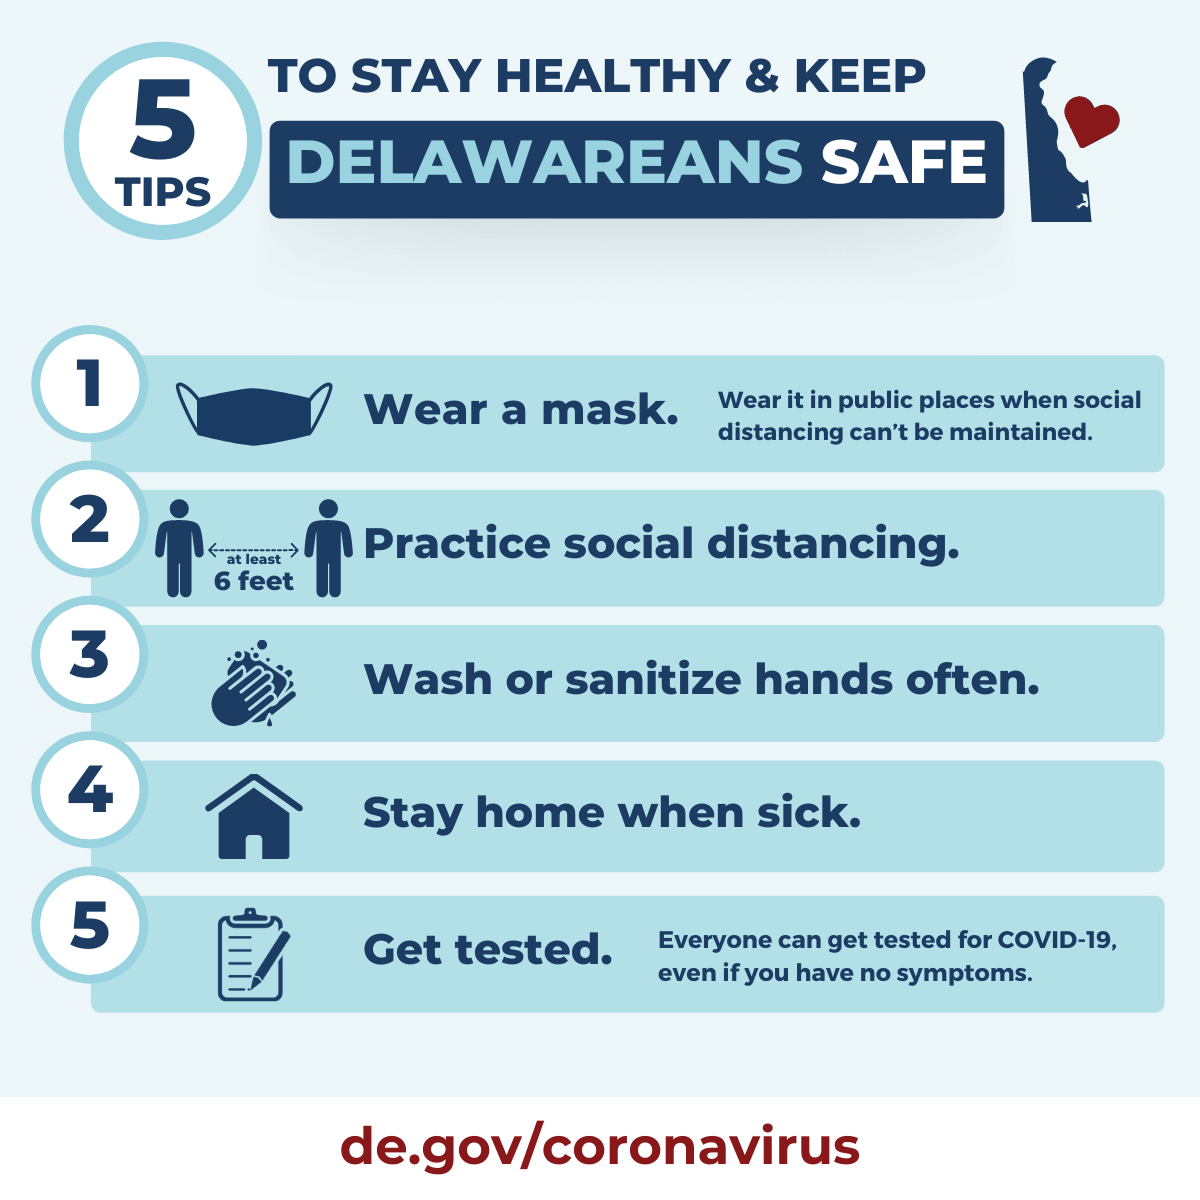 5 Tips to Stay Healthy & Keep Delawareans Safe Delaware